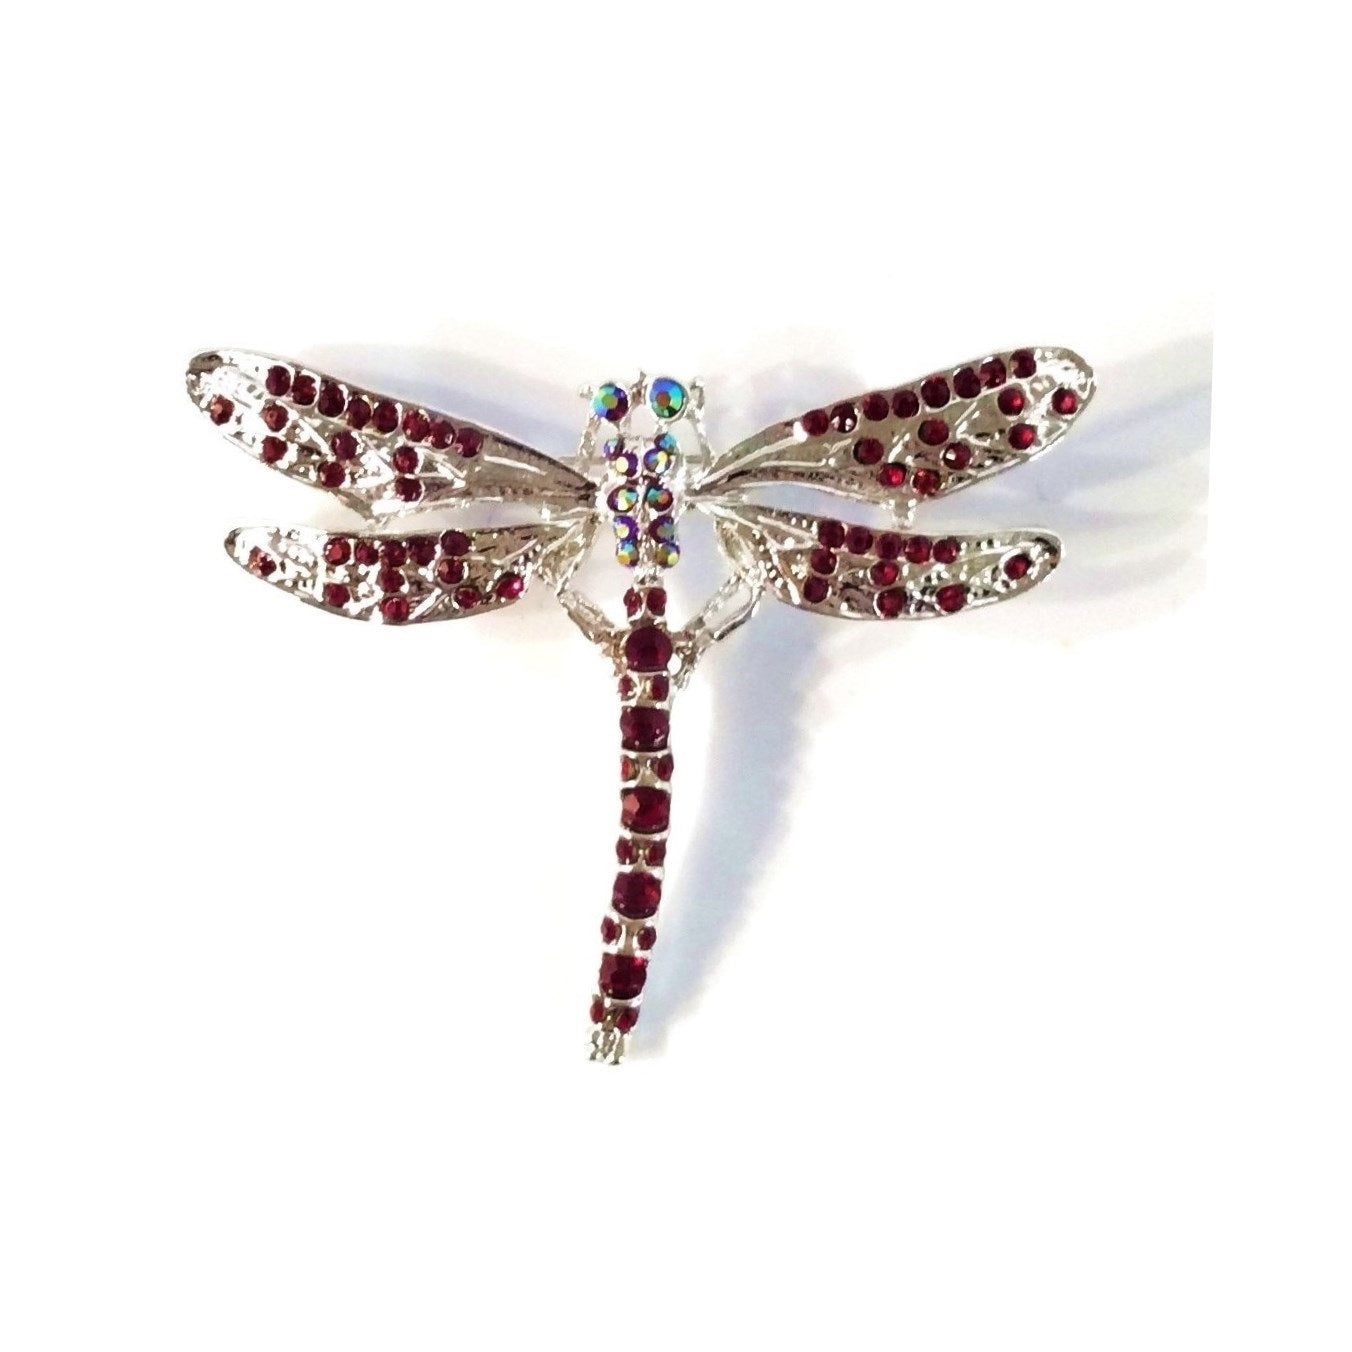 Dragonfly Pin #28-111151RD (Red)